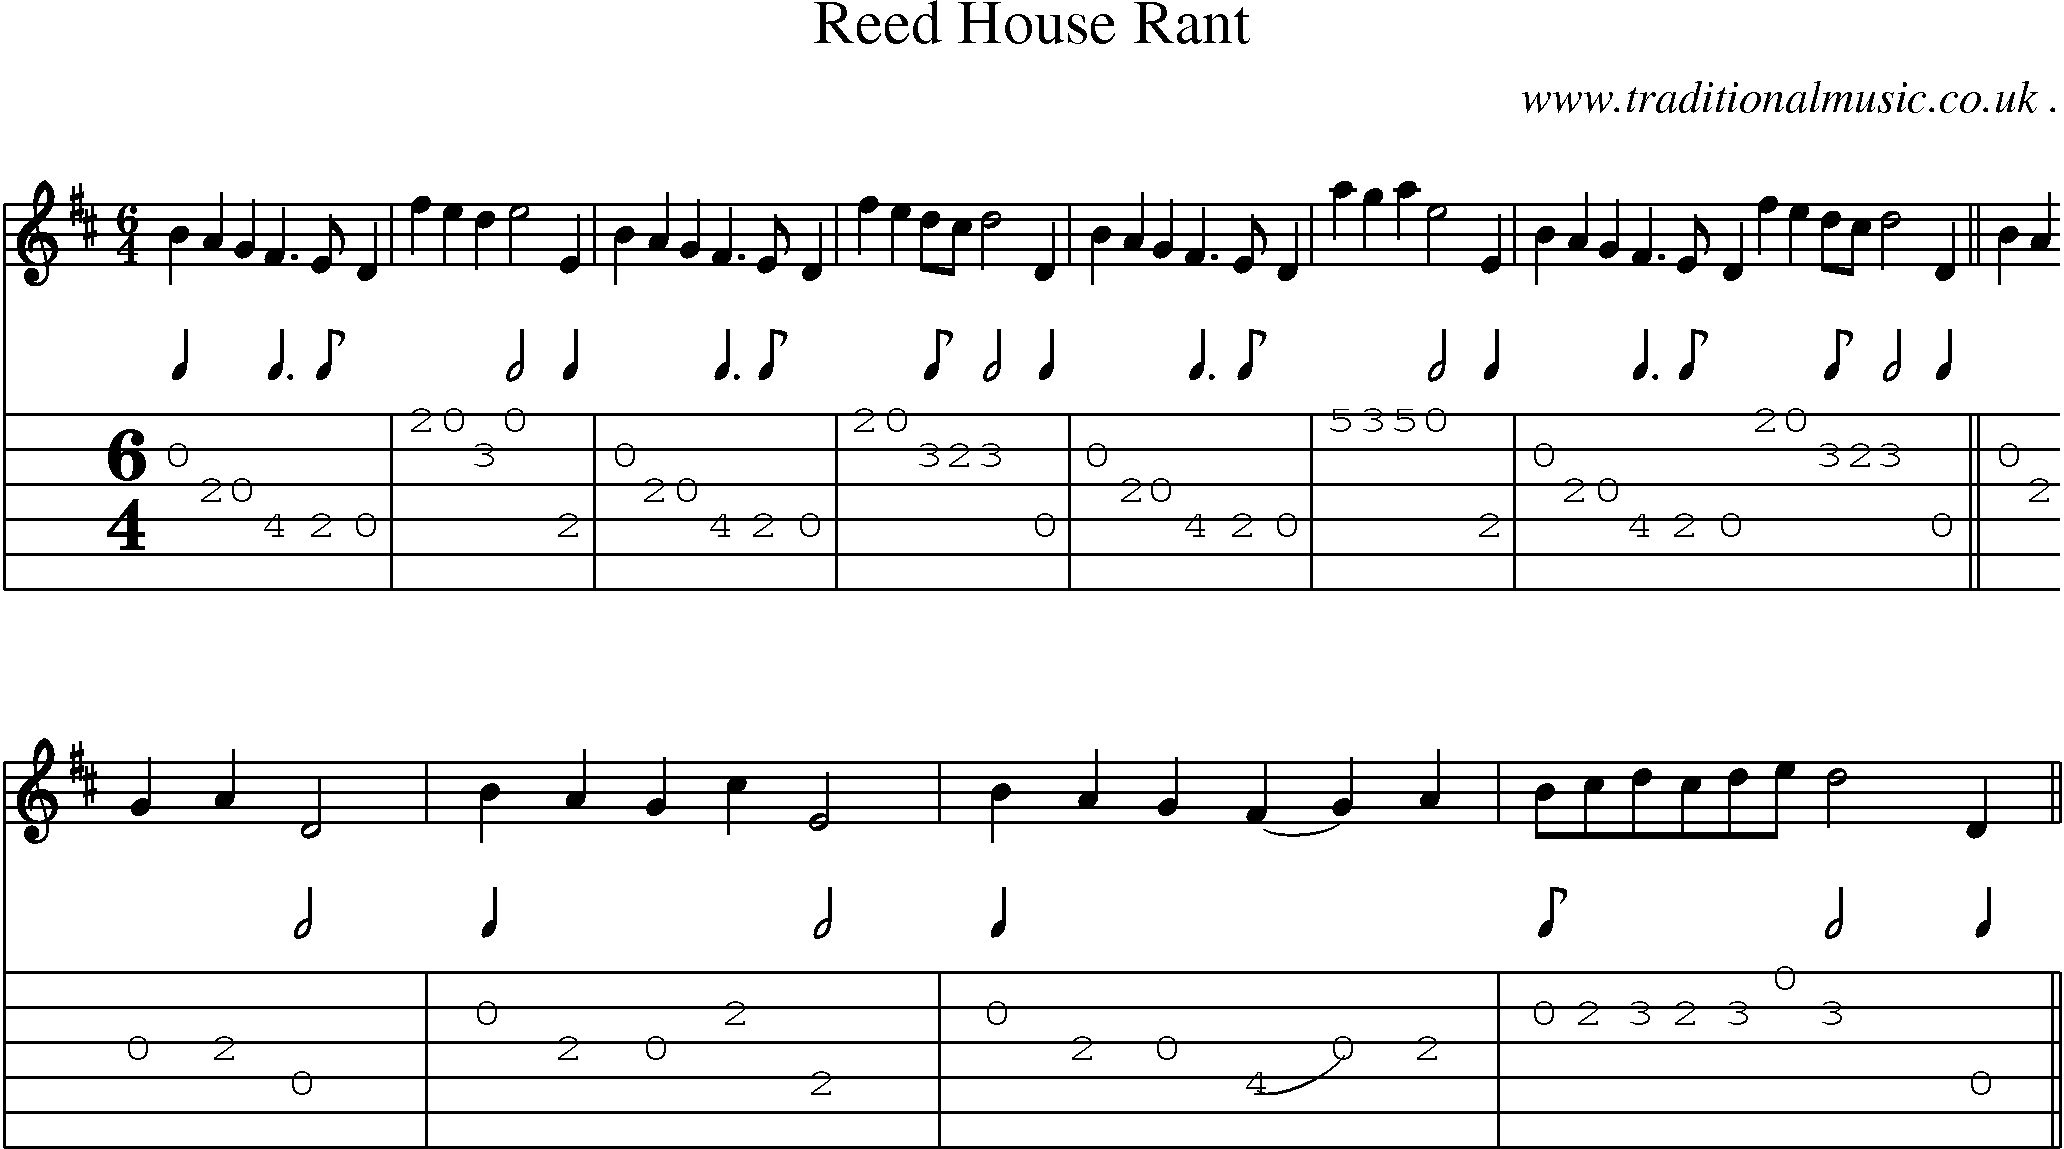 Sheet-Music and Guitar Tabs for Reed House Rant